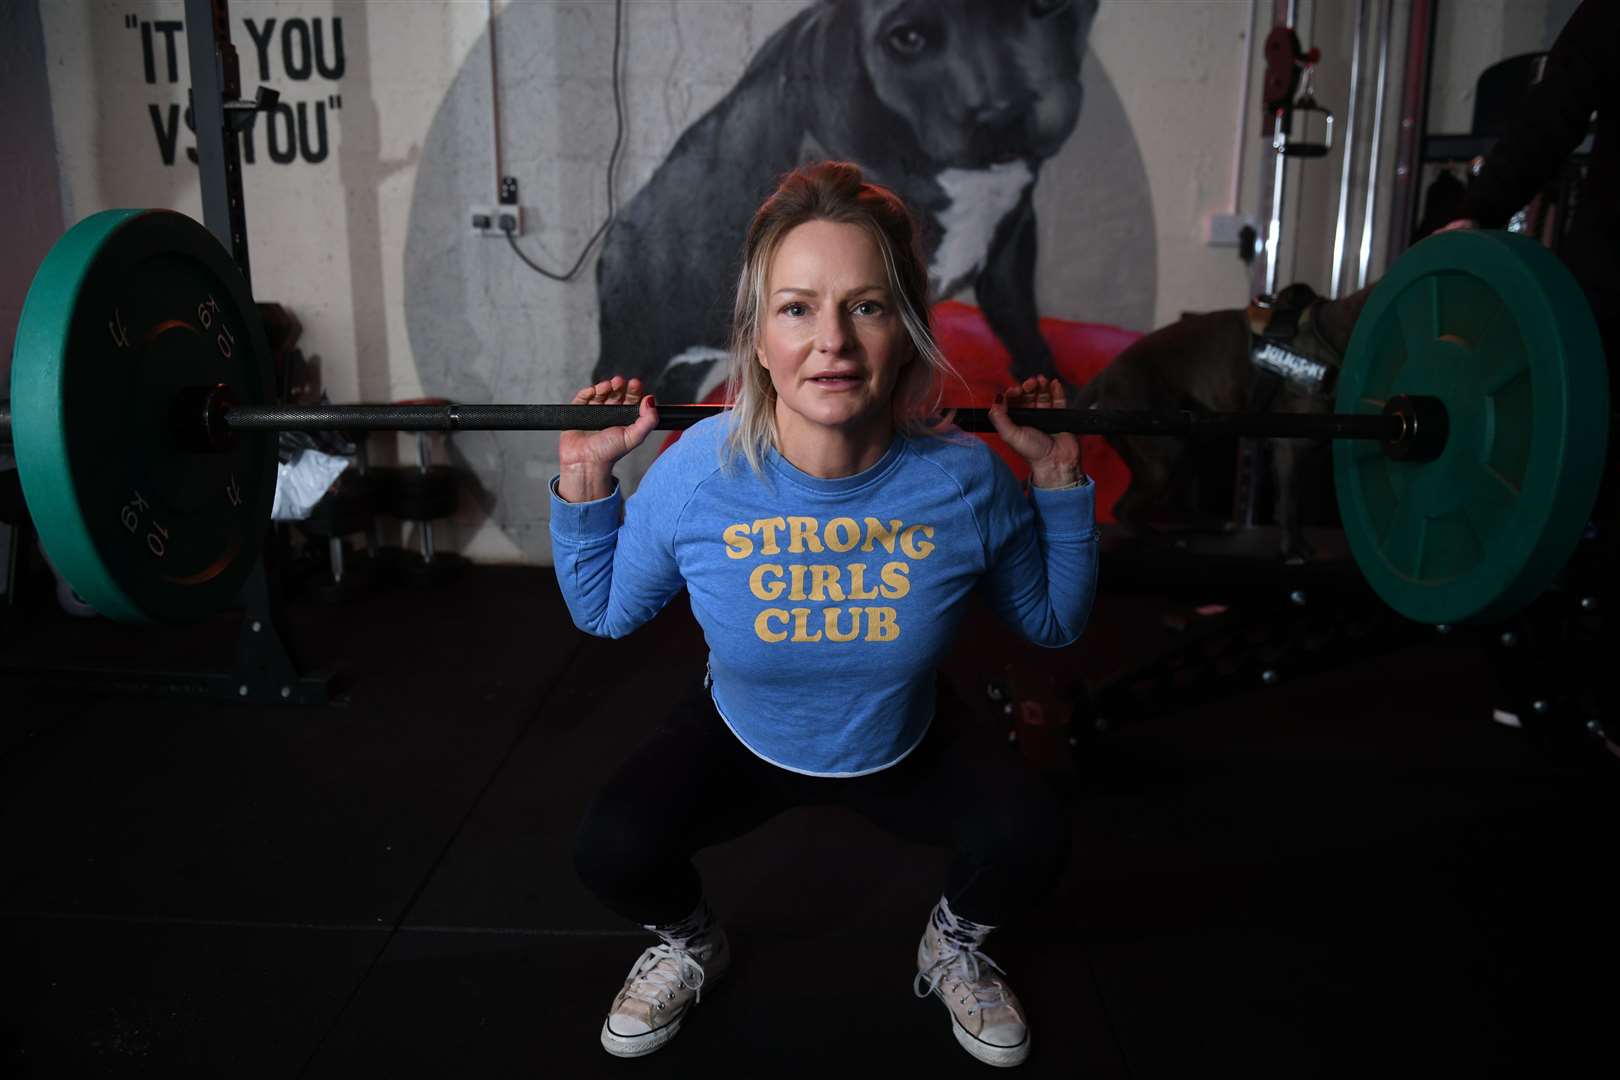 Powerlifting gave Irving the strength – both physically and mentally – to turn her life around. Picture: James Mackenzie